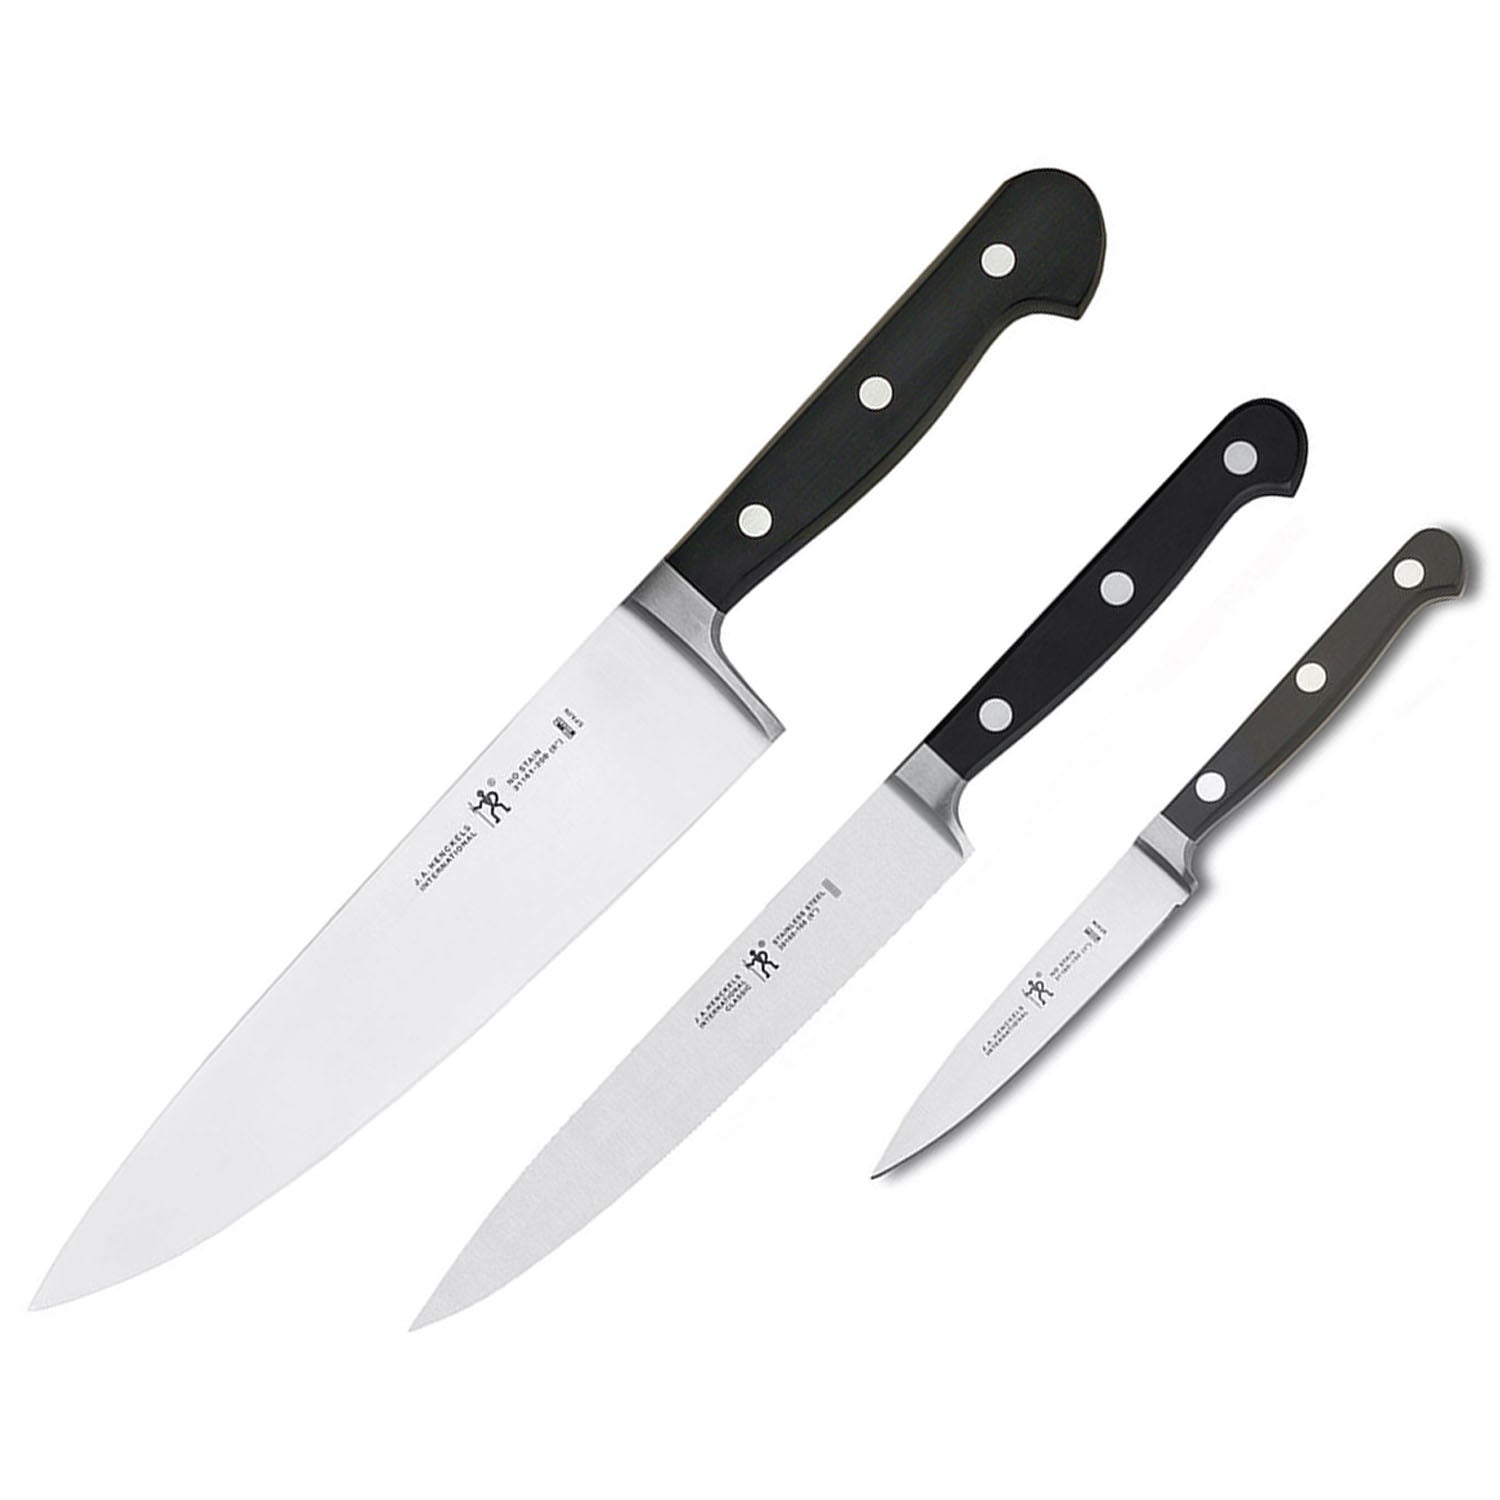 3 Inch Paring Knife - Lodging Kit Company